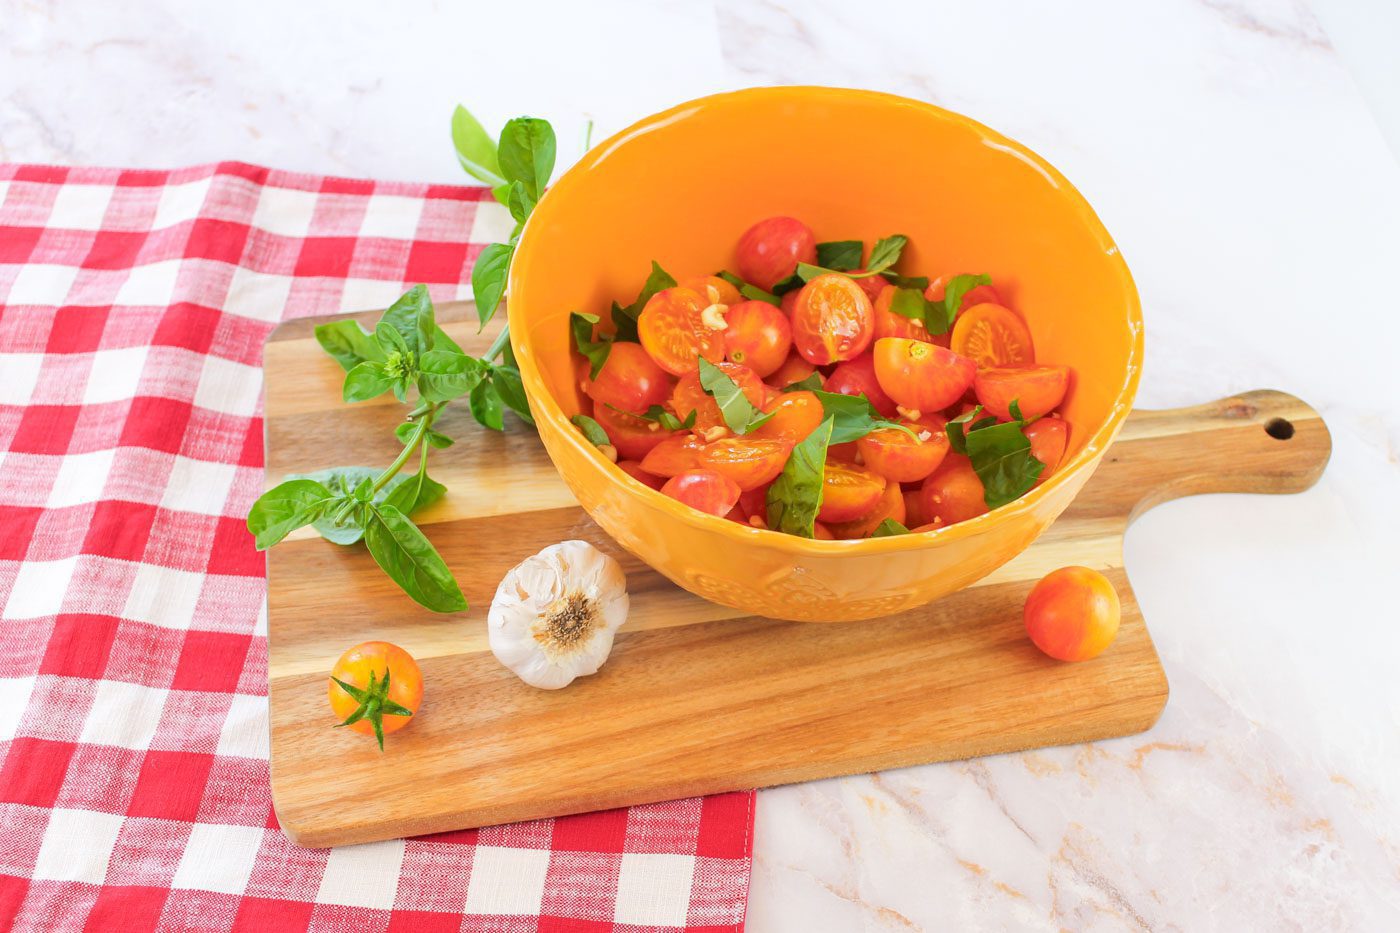 on top of a red plaid napkin is a cutting board and yellow bowl of sliced tomatoes, garlic and shredded basil